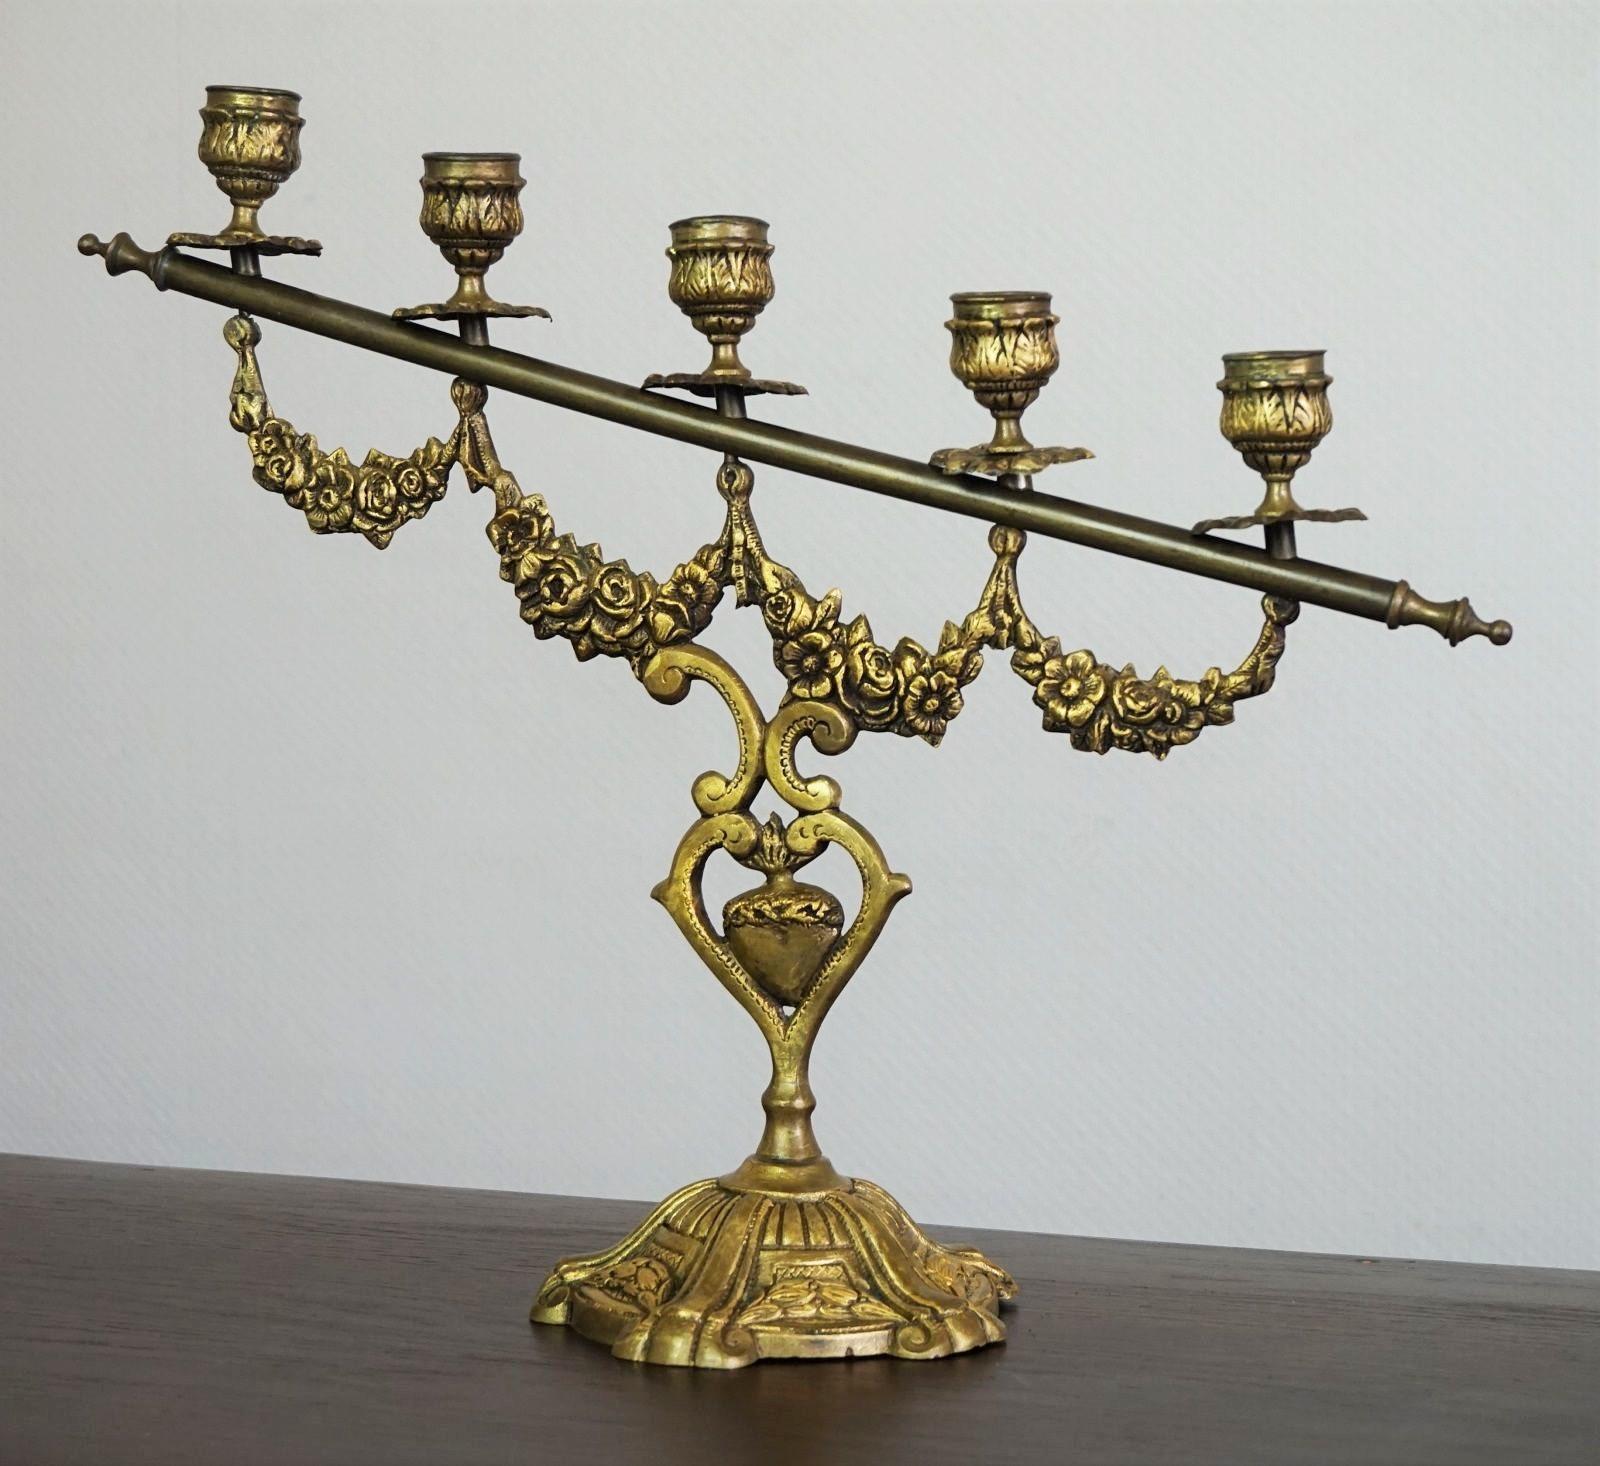 A rare pair of fire-gilded bronze five-light altar candelabra decorated with sublime details, Spain, mid-19th century.
Great aged patina to bronze. 
Dimensions:
Height 14.25 inches (36 cm)
Width 16.50 inches (42 cm)
Base diameter 5.12 inches